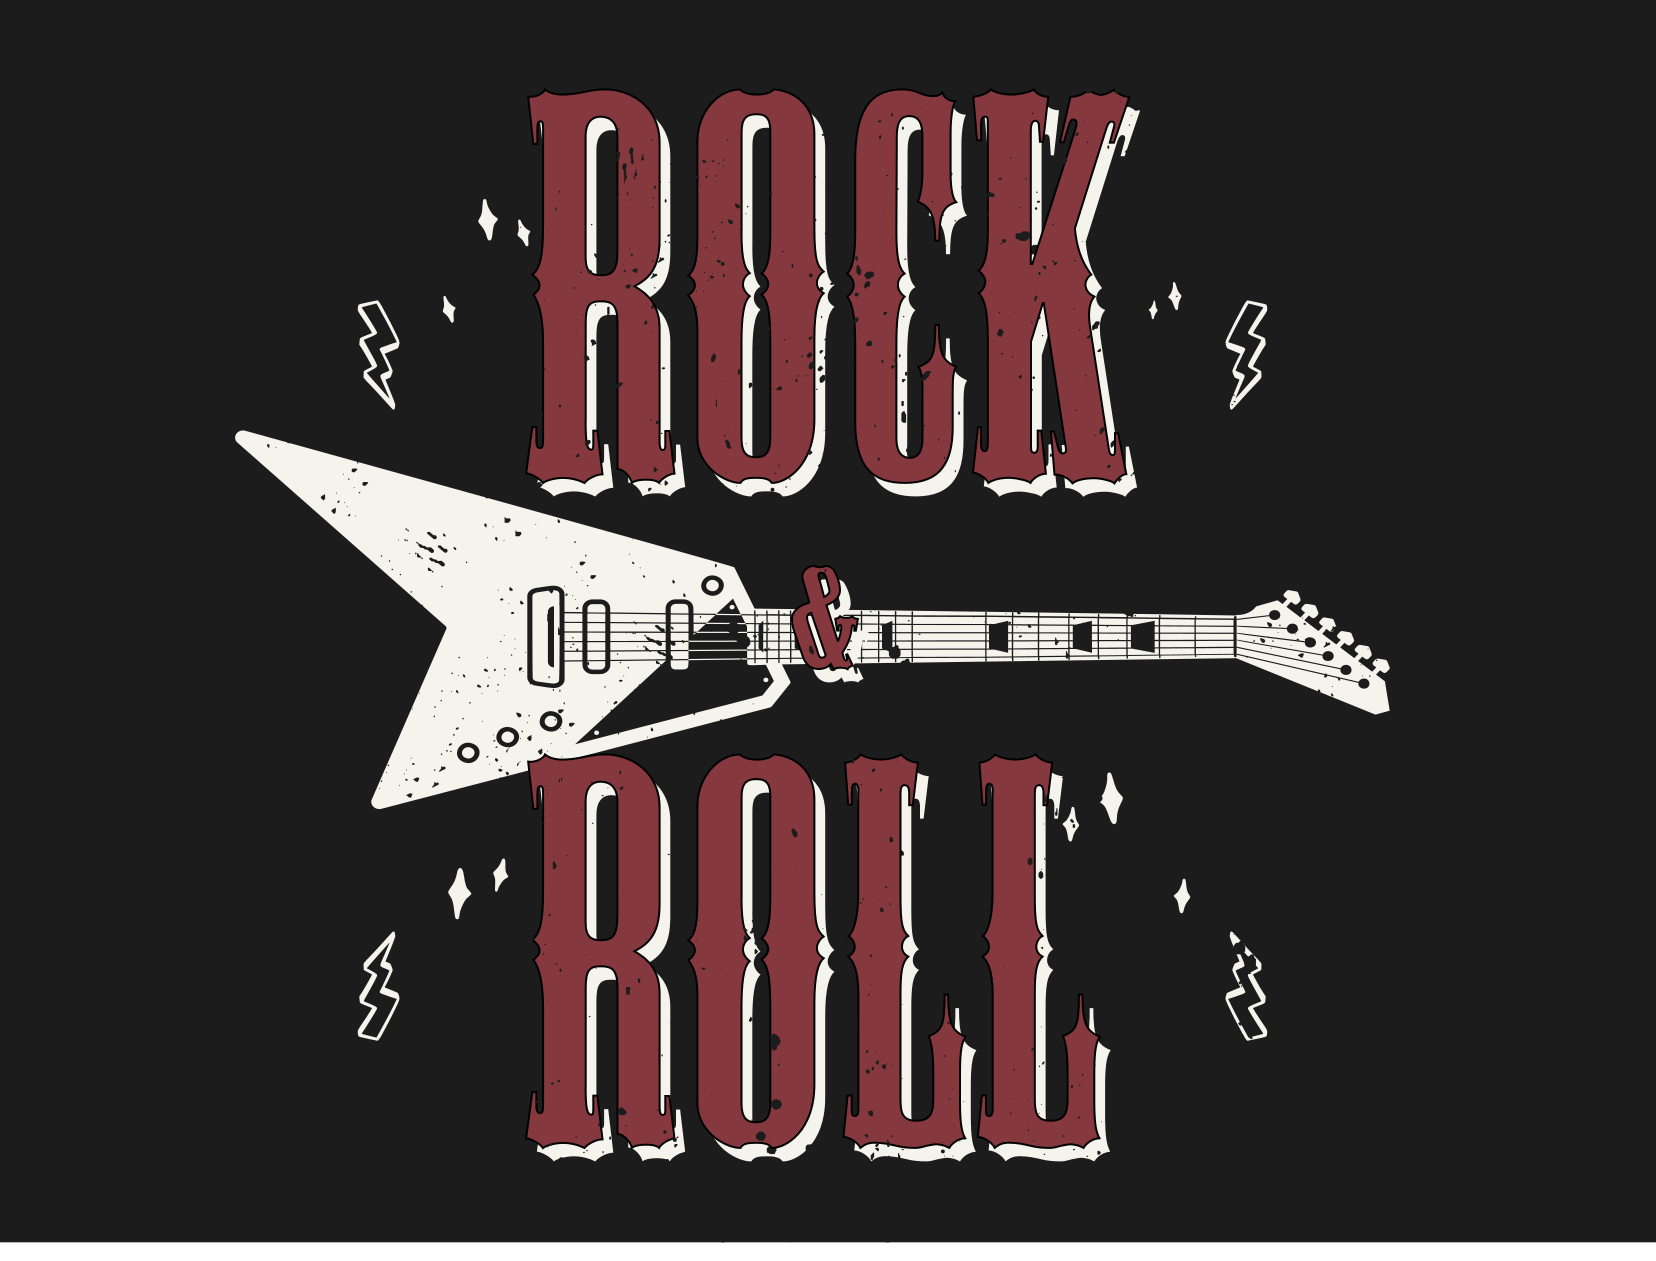 Rock n' Roll with guitar design wall murals for teenage bedrooms